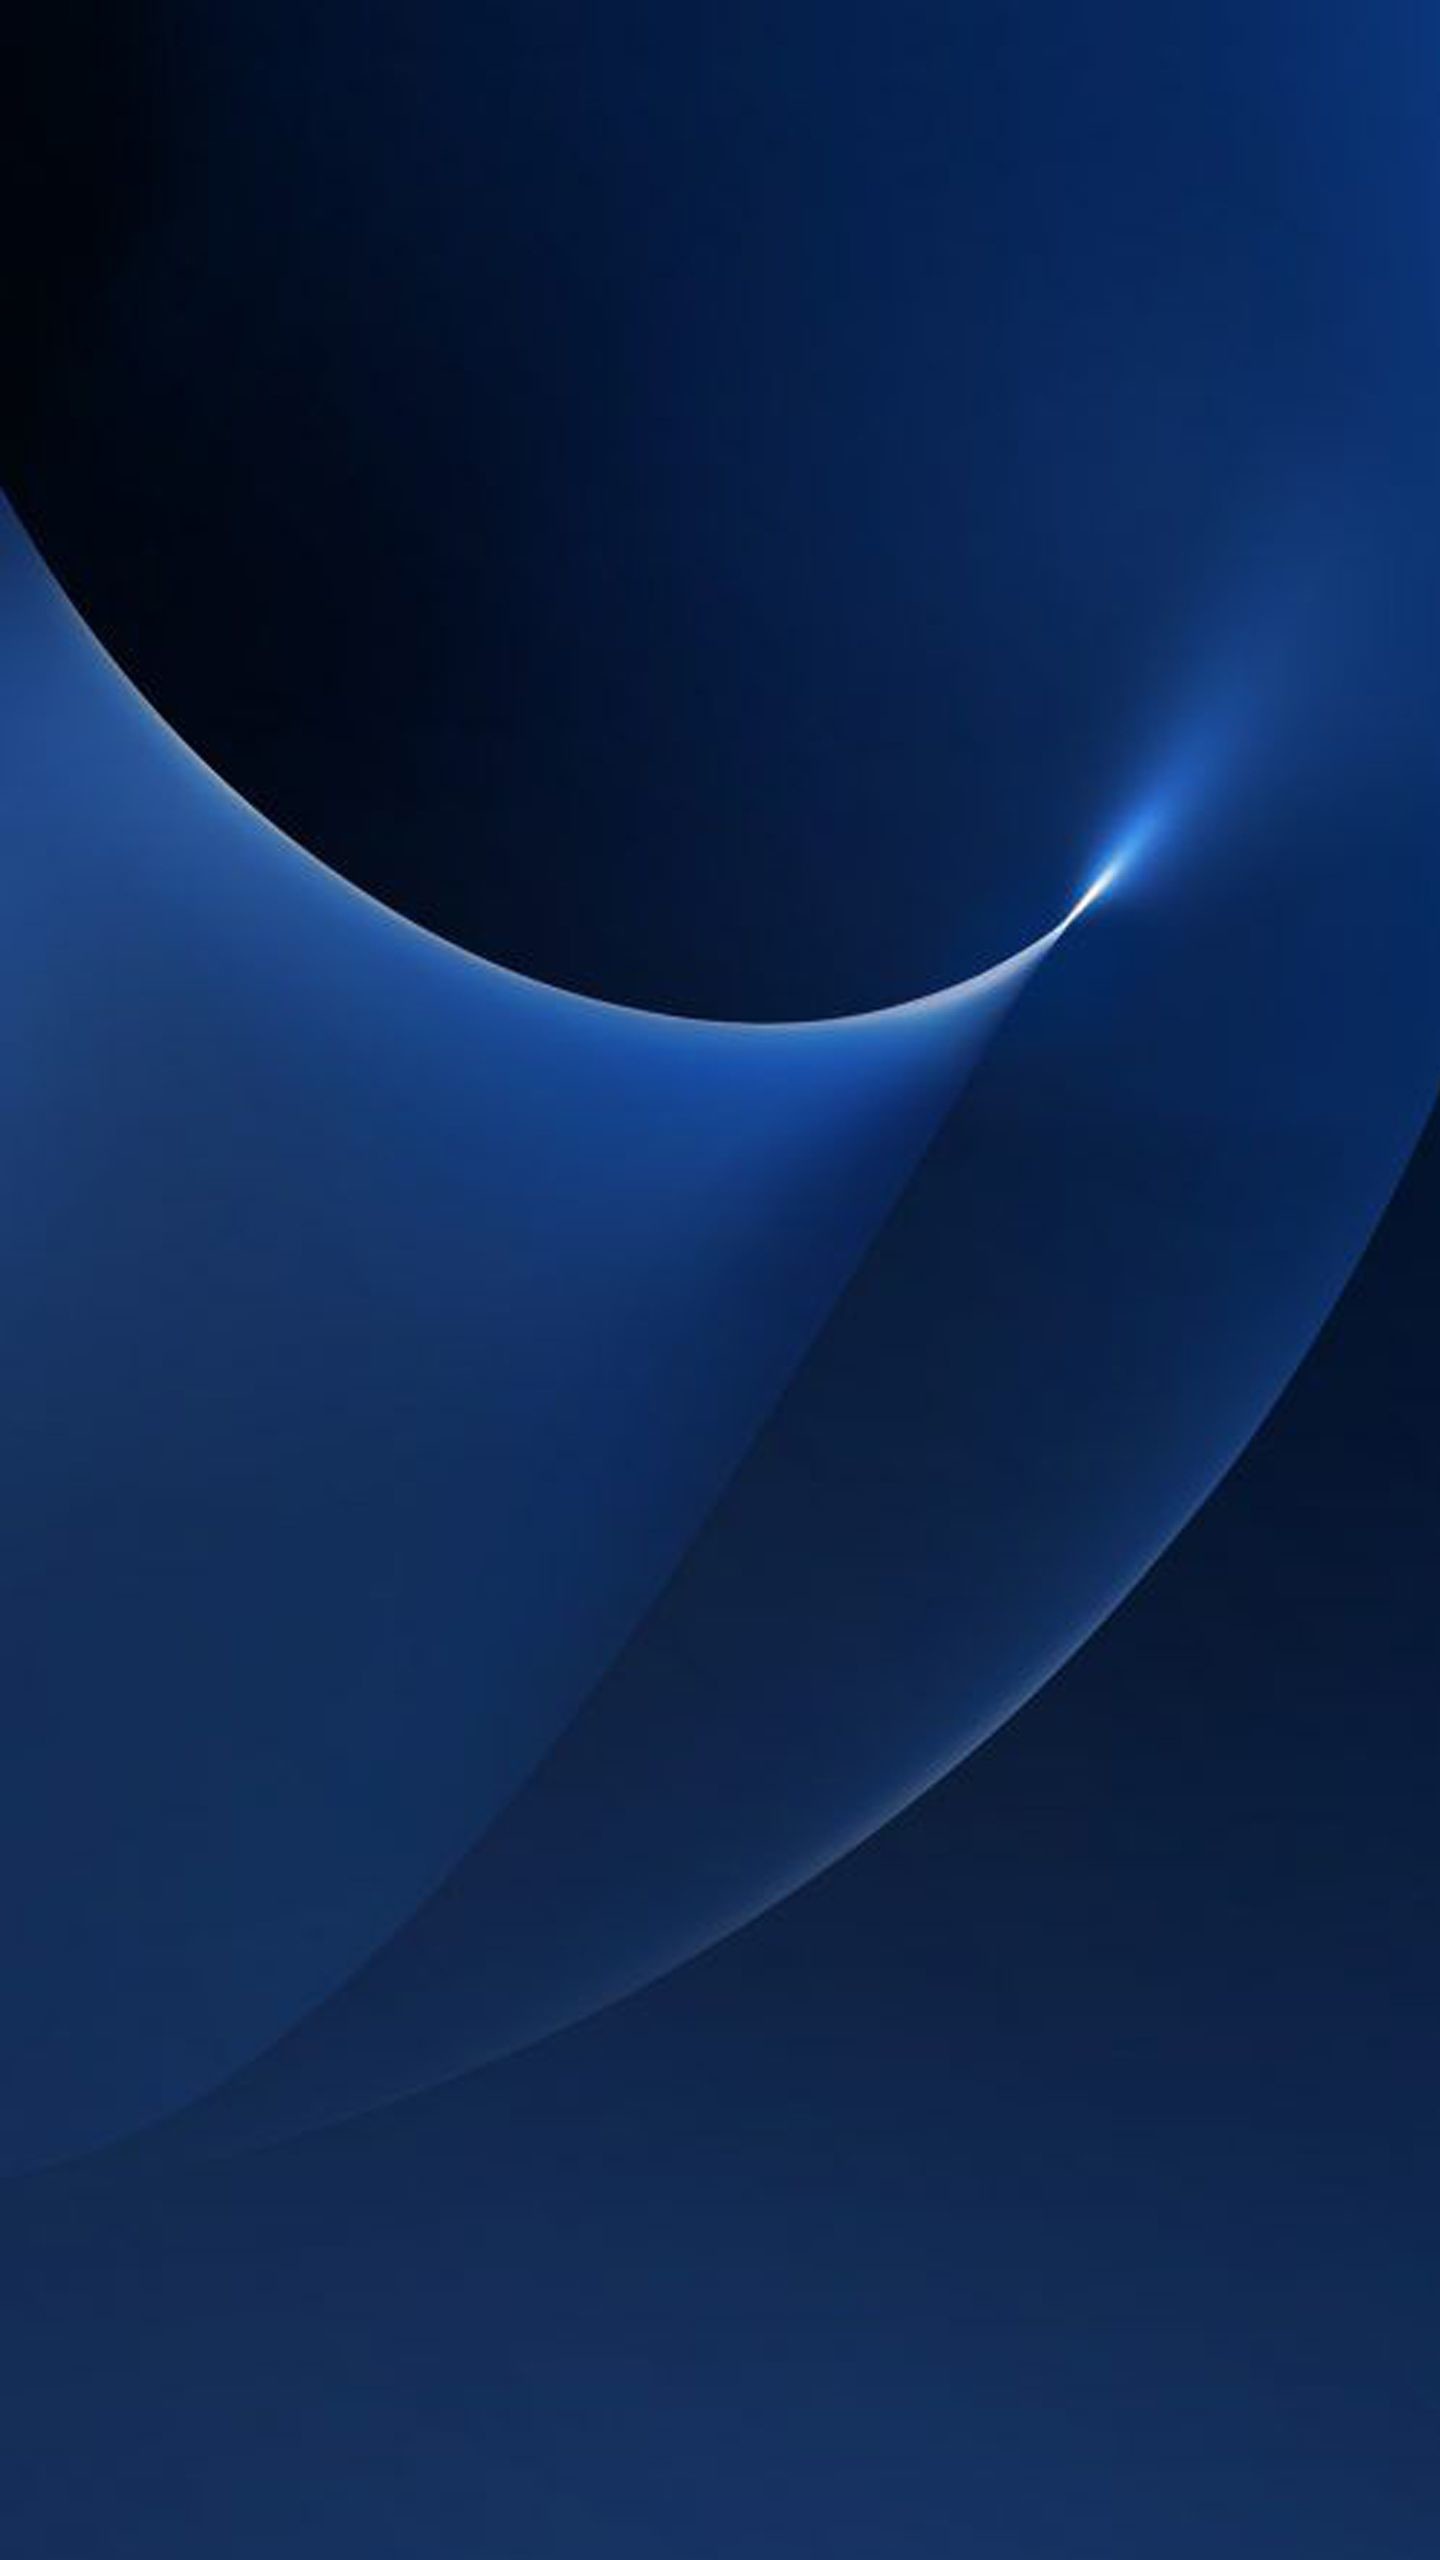 1440x2560 Curve Lights 06 for Samsung Galaxy S7 and Edge Wallpaper